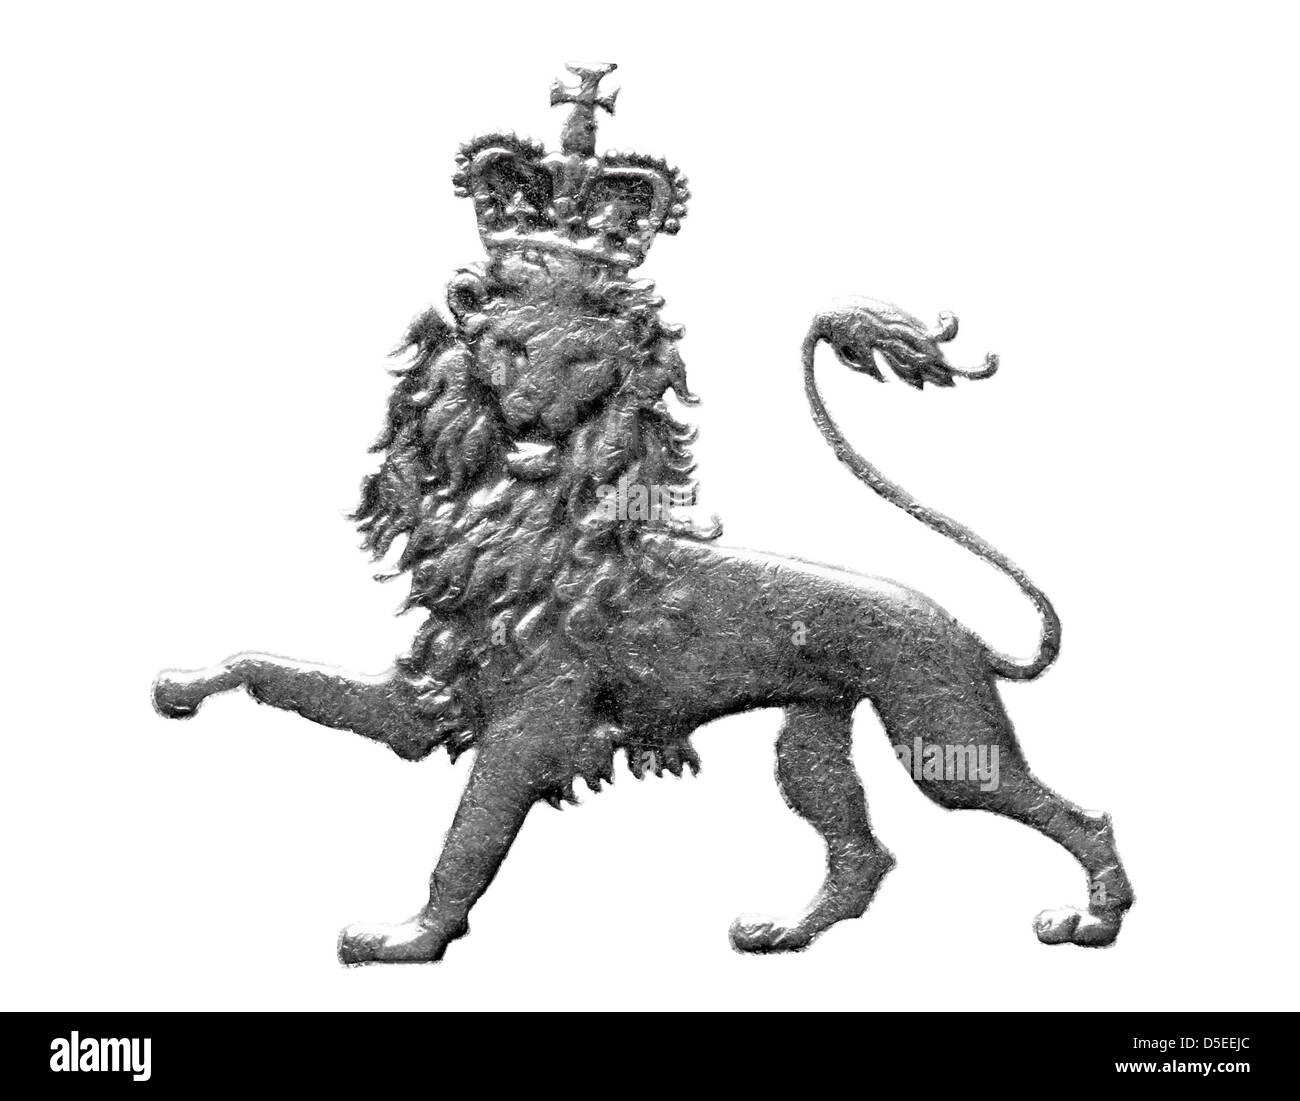 Crowned lion from 10 pence coin, UK, 2003, on white background Stock Photo